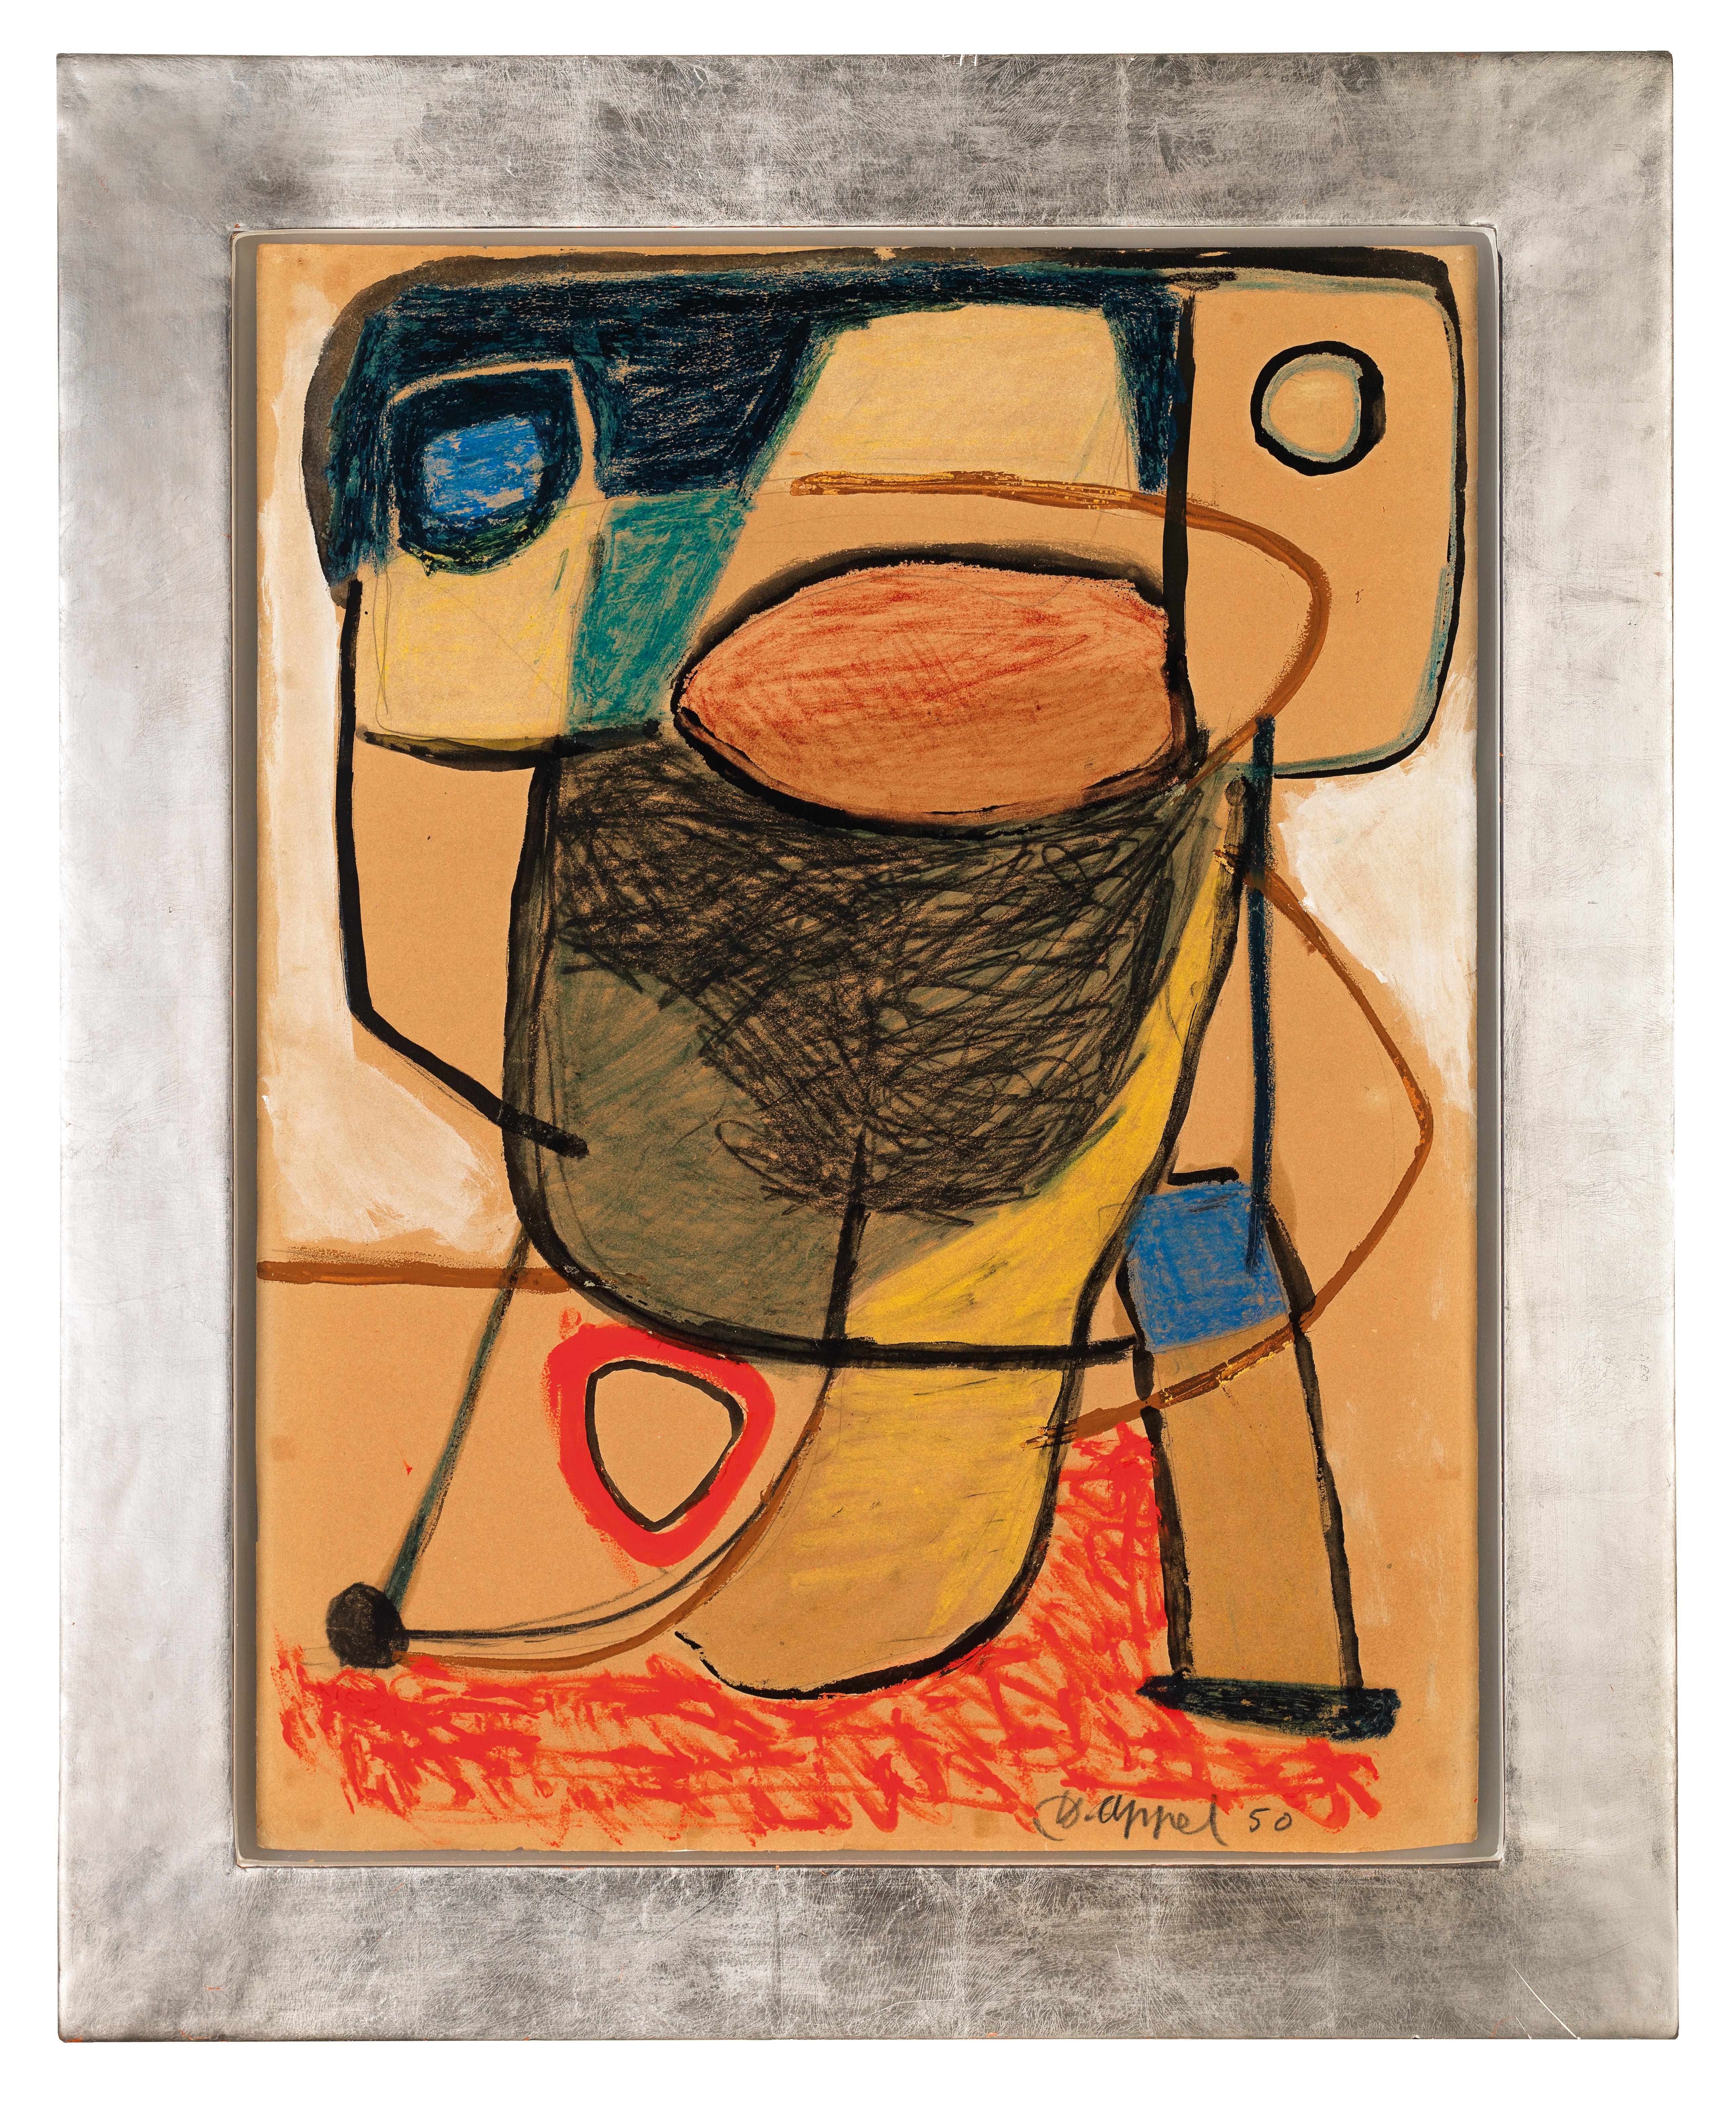 Artwork by Karel Appel, Untitled, Made of mixed media on brown paper